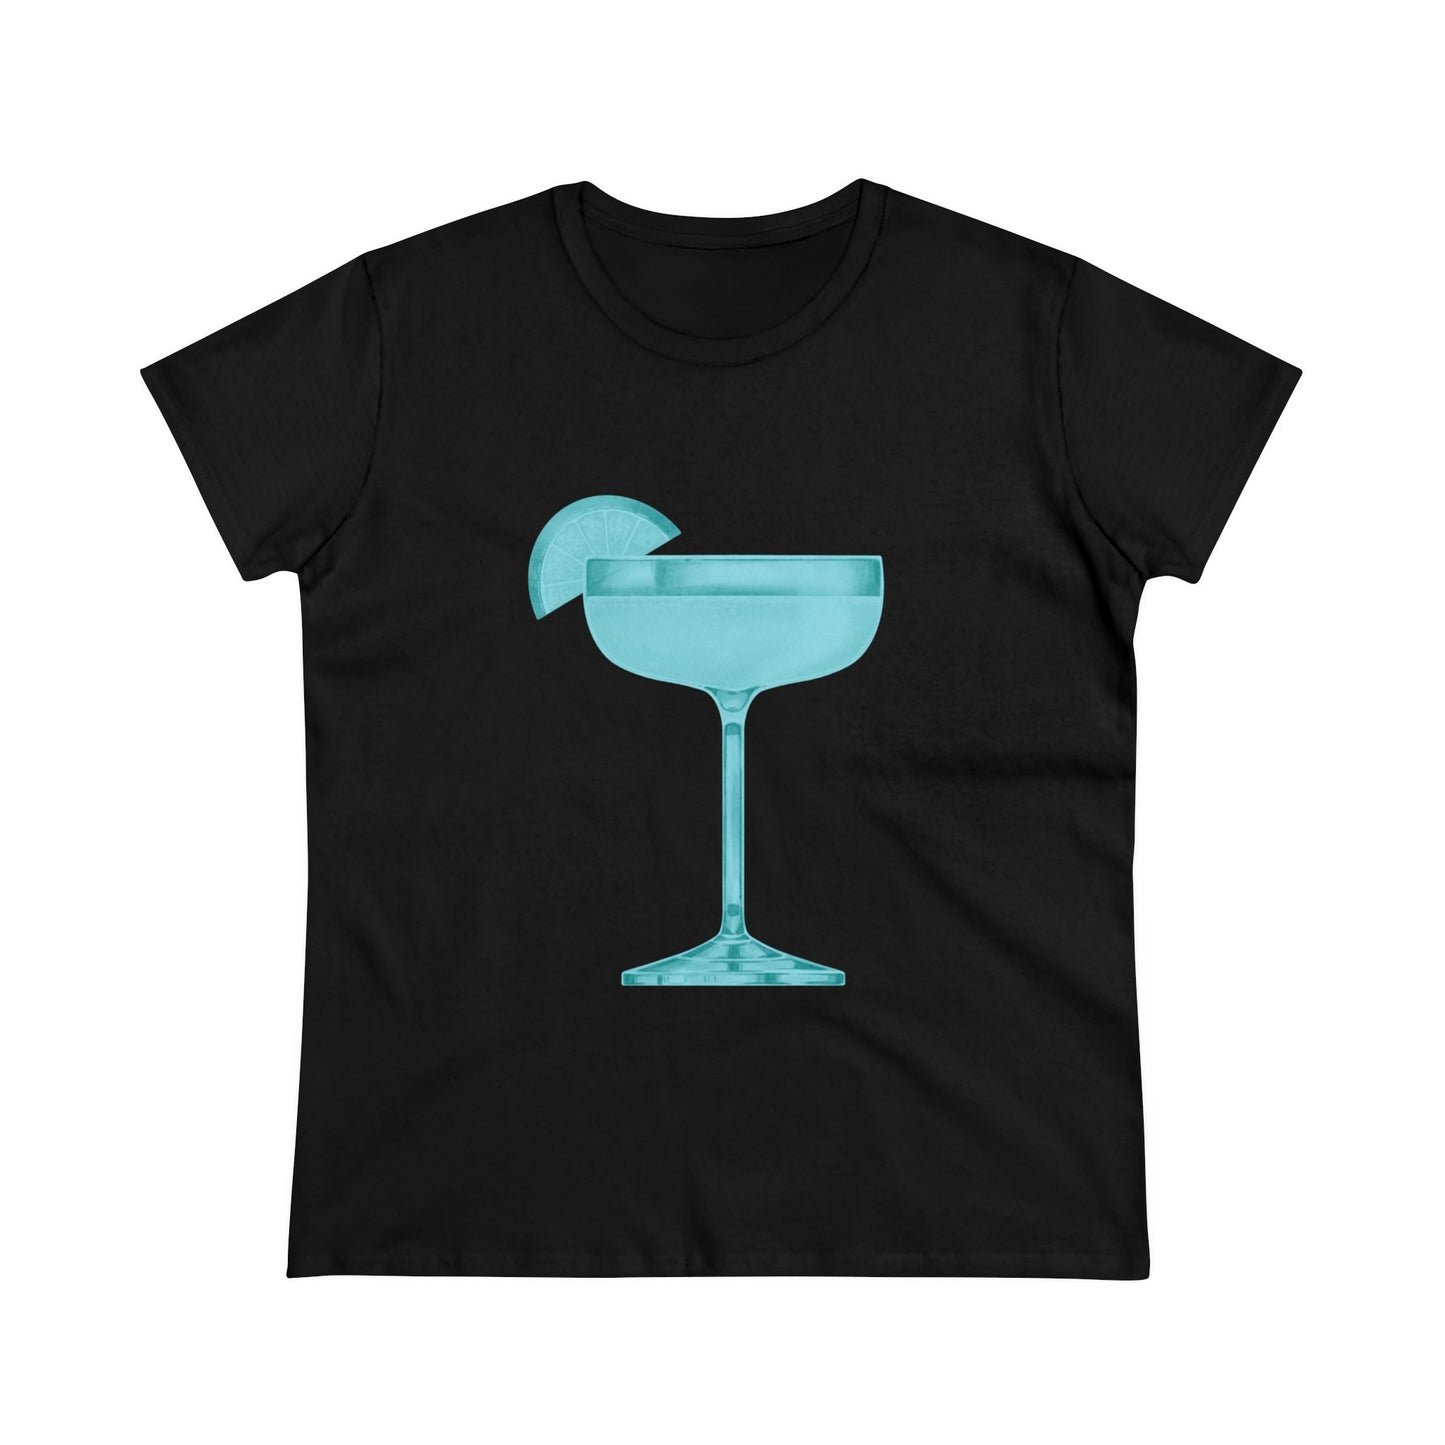 'pour me one of those' tee